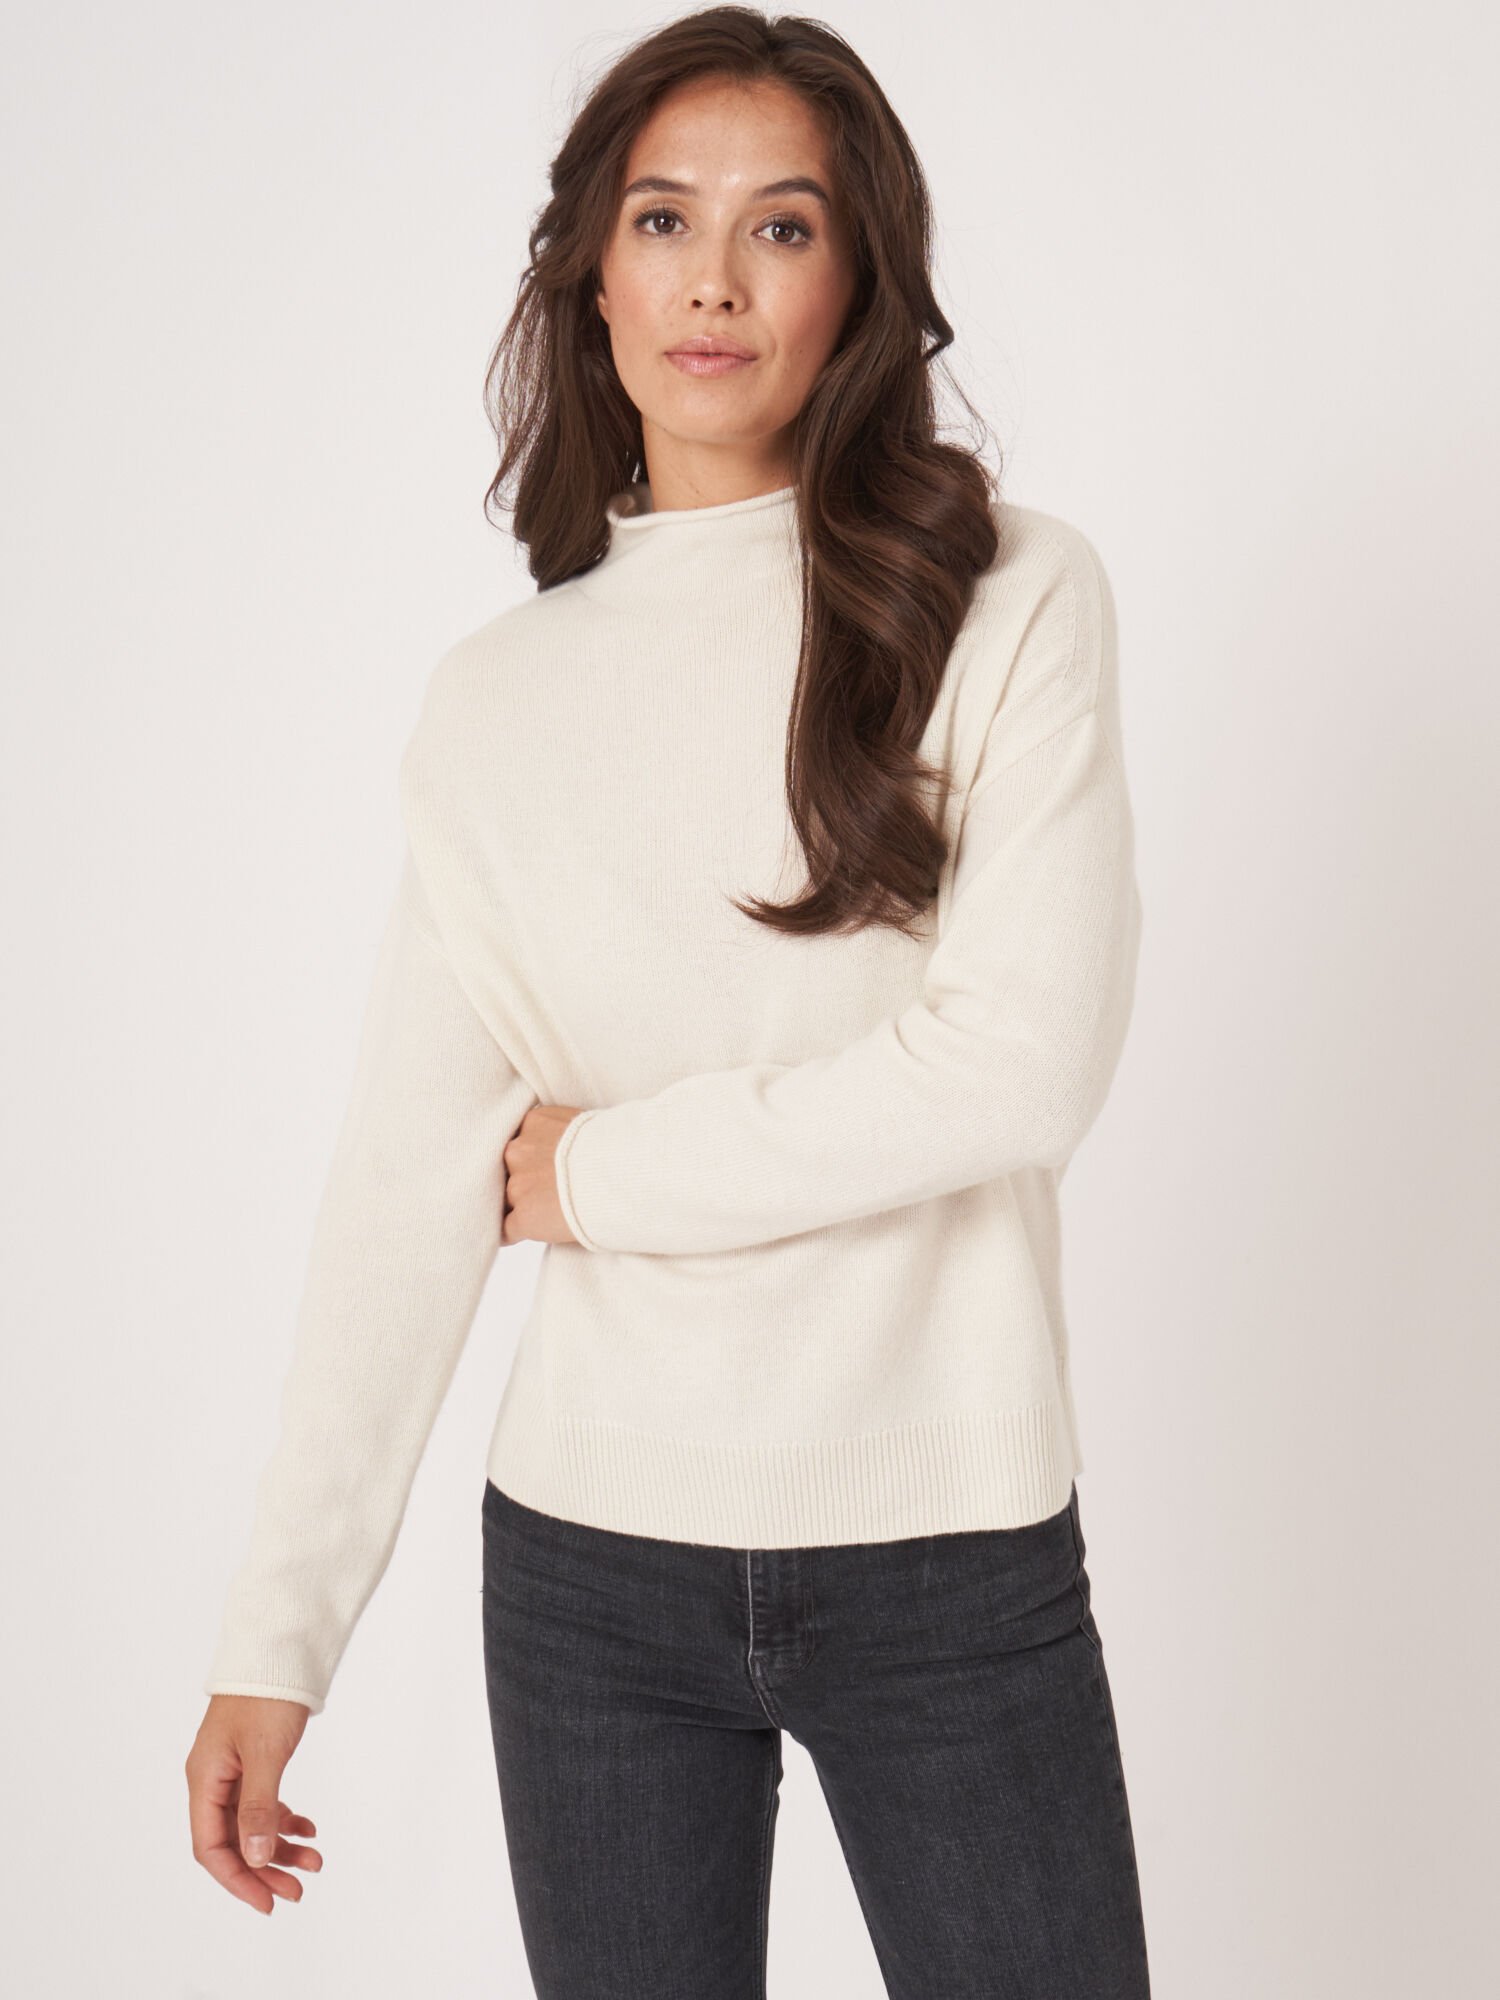 Limited Edition Collection | REPEAT Cashmere